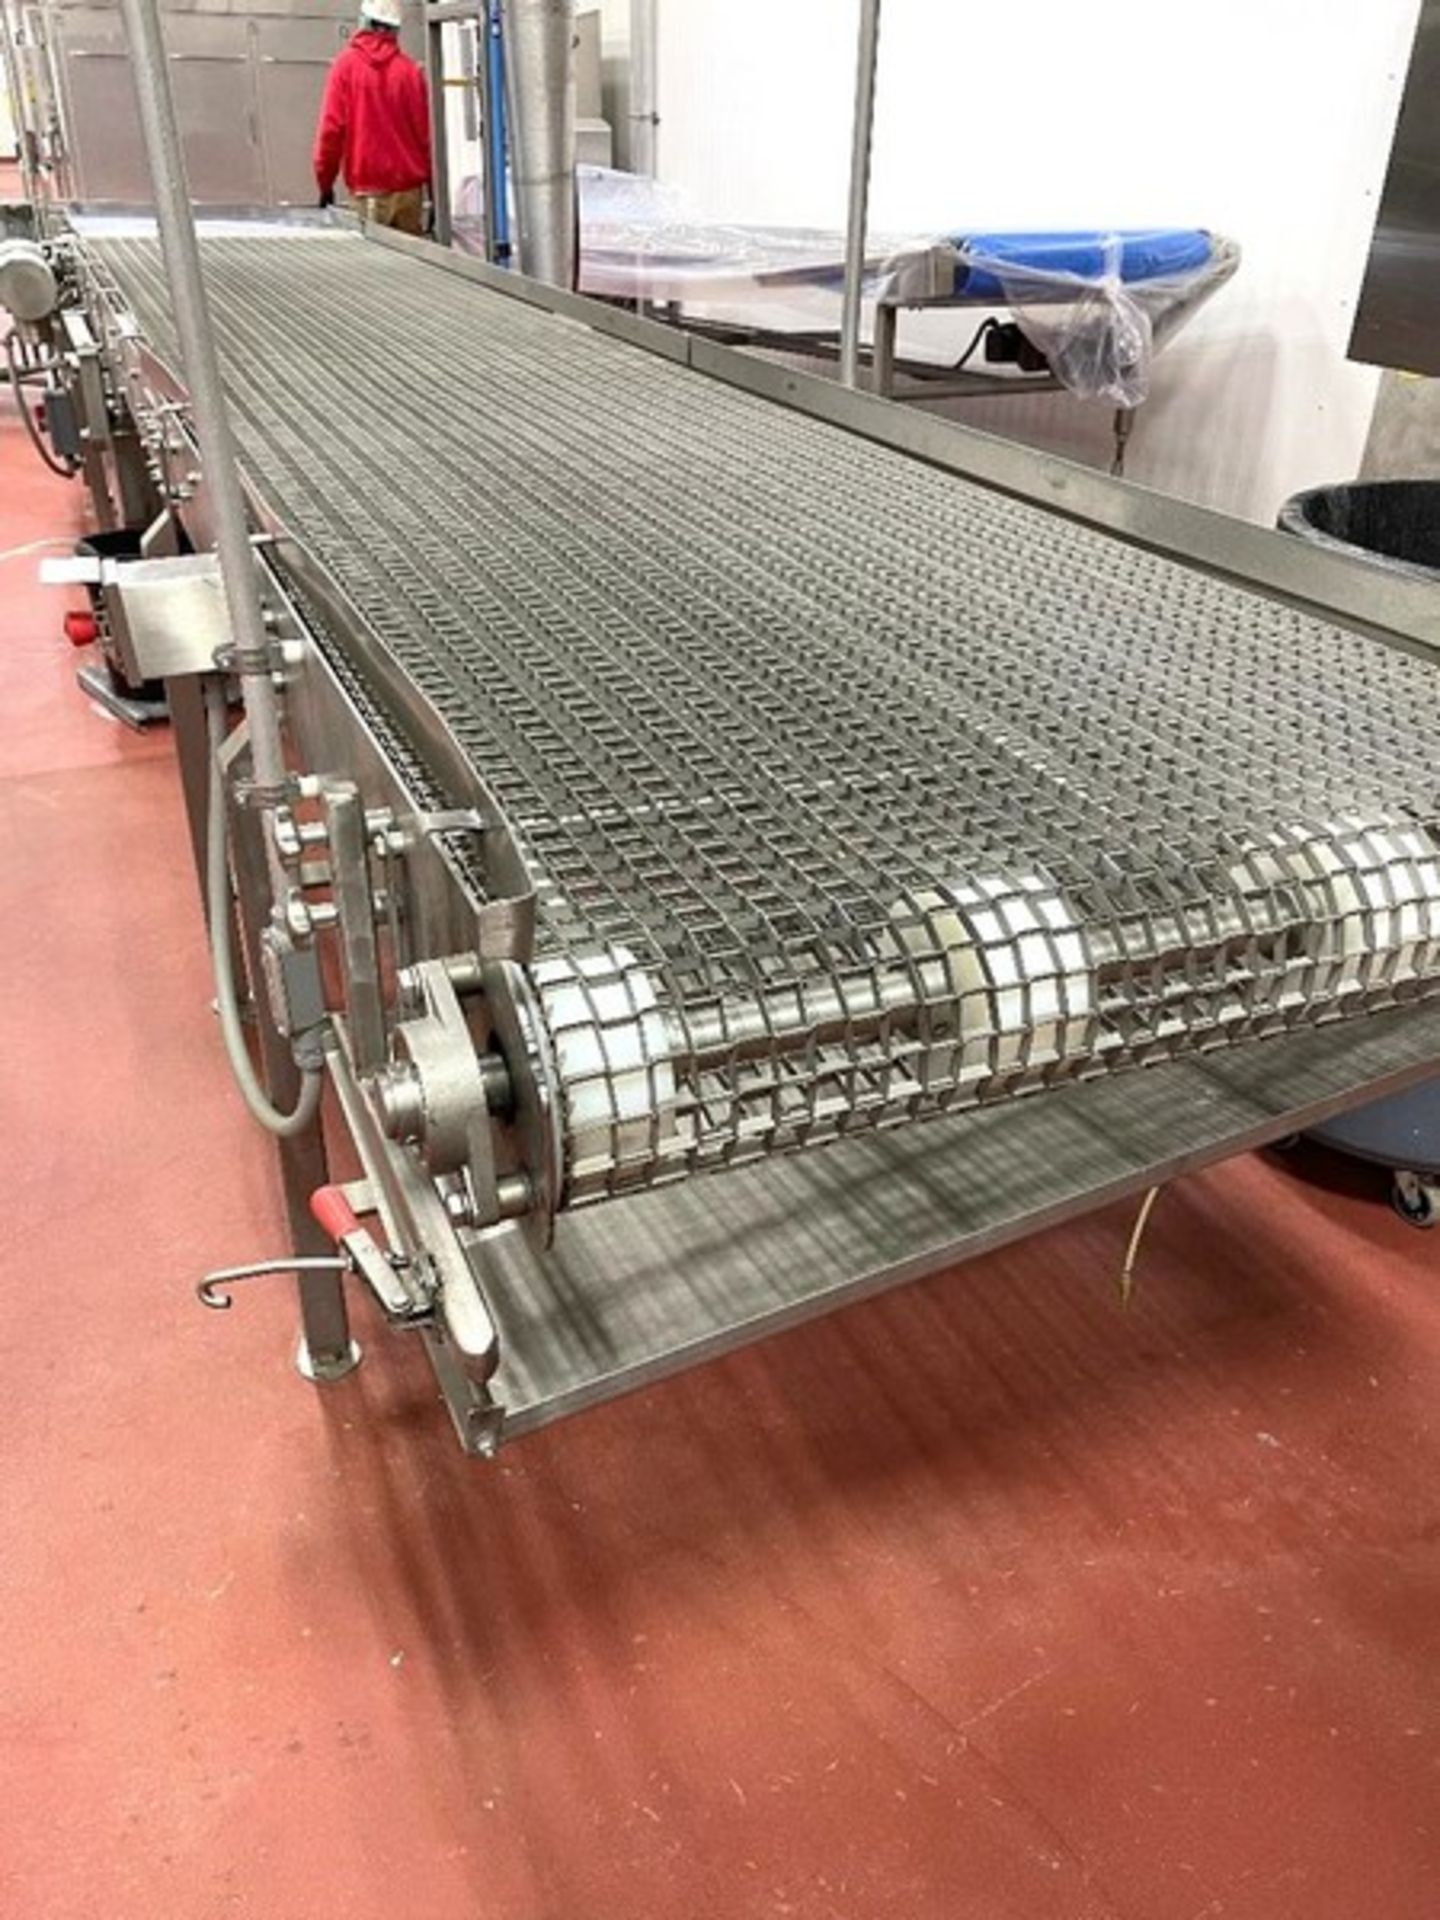 Aprox 36" Wide x 17 ft. Long S/S Sanitary Wire Mesh Belt Conveyor, System last used with Bagels - Image 2 of 8